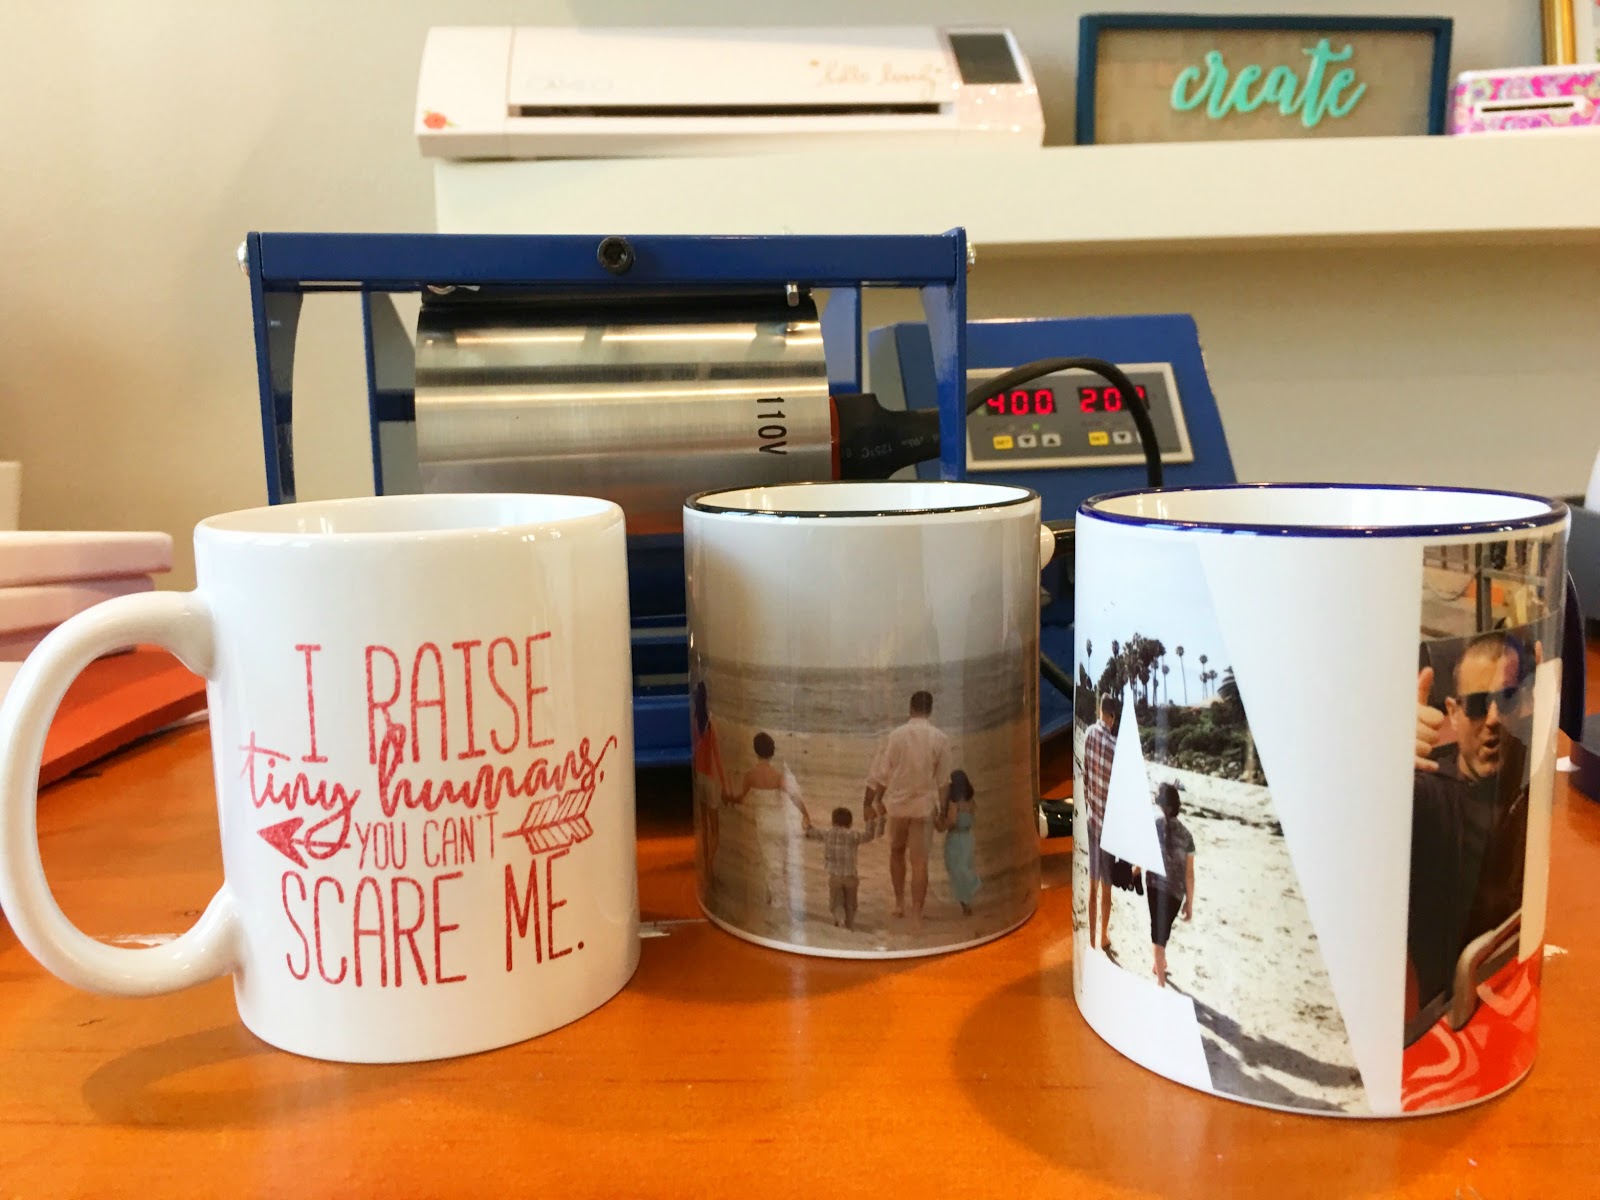 Sublimation Coffee Mugs with Silhouette – Silhouette Secrets+ by Swift  Creek Customs